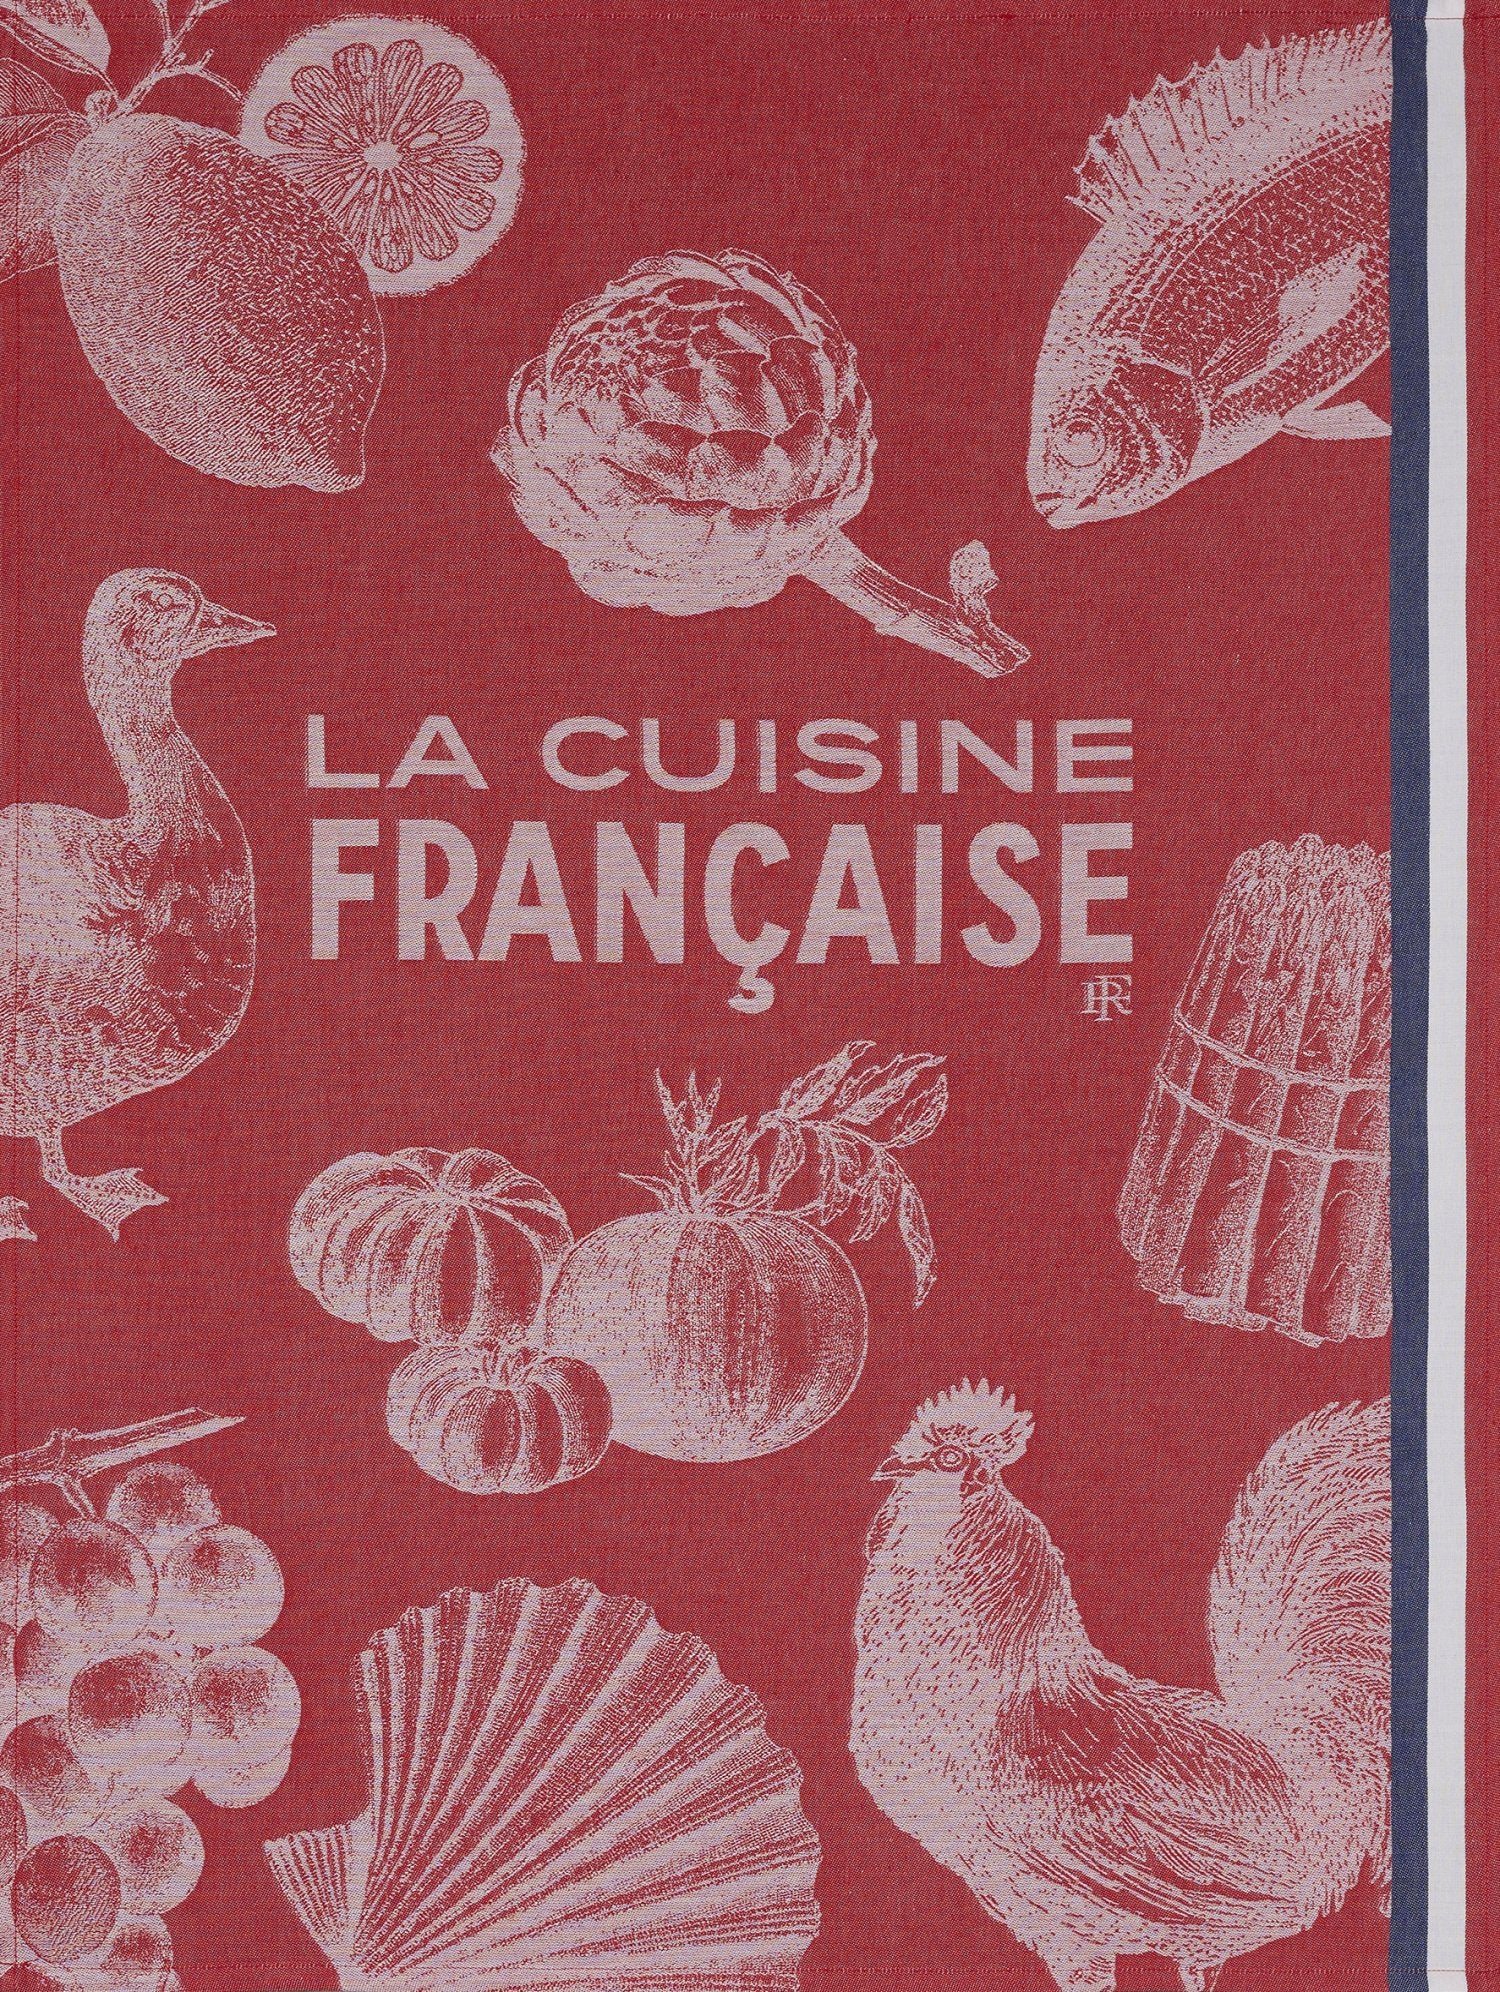 Jacquard Francais "Gastronomie" (Red), Woven cotton tea towel. Made in France.